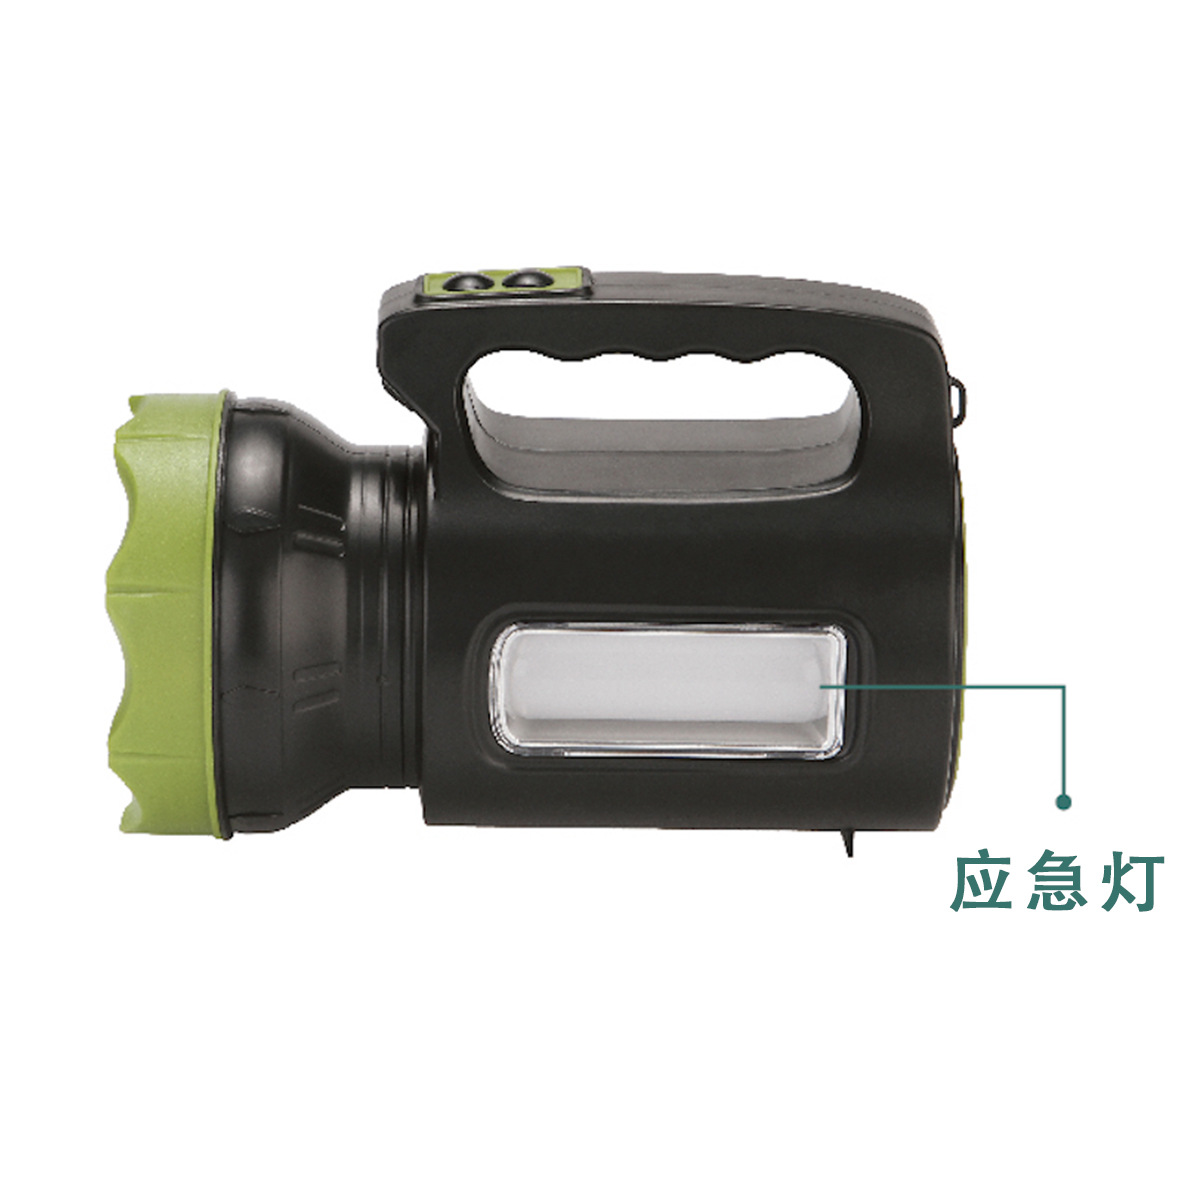 Portable Searchlight Outdoor Led Multi-Function Torch Rechargeable Emergency Light